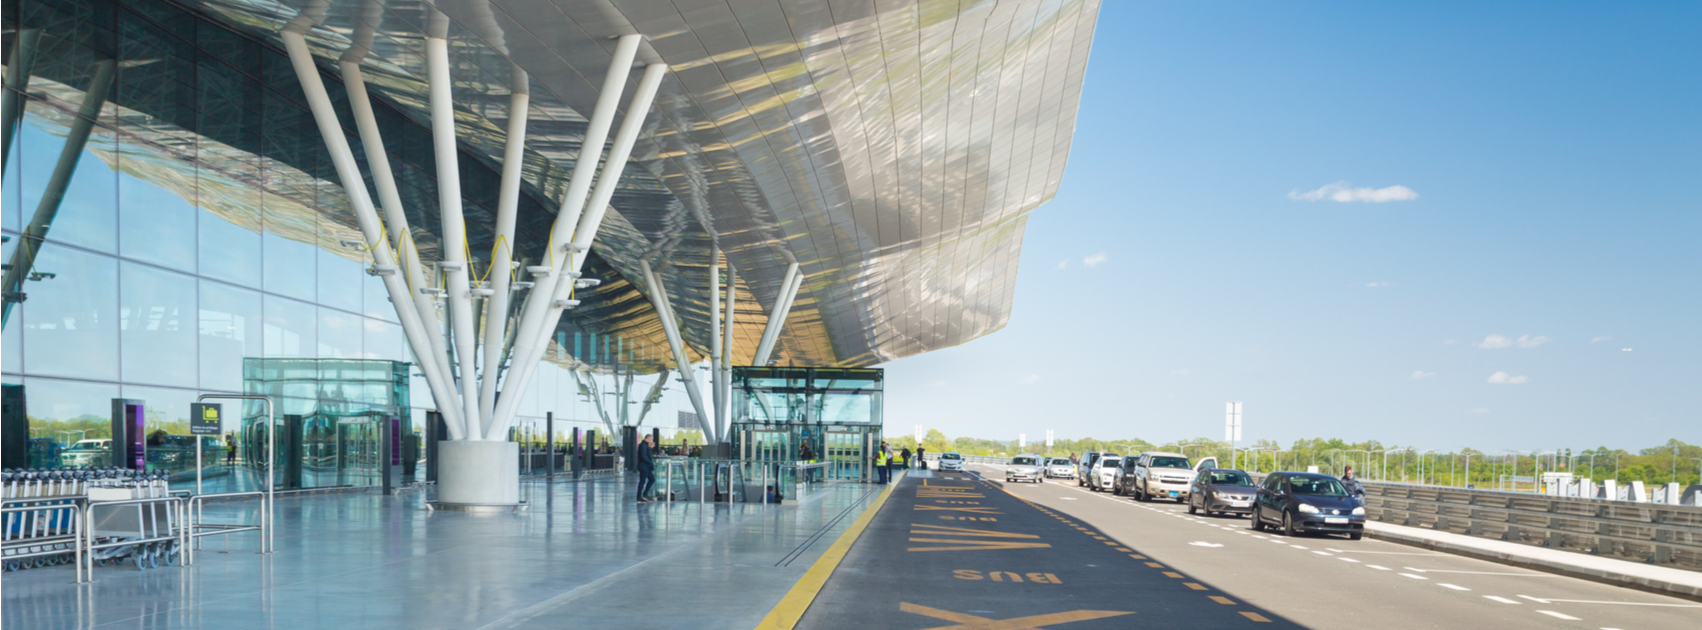 Zagreb Airport H1 passenger traffic better than expected